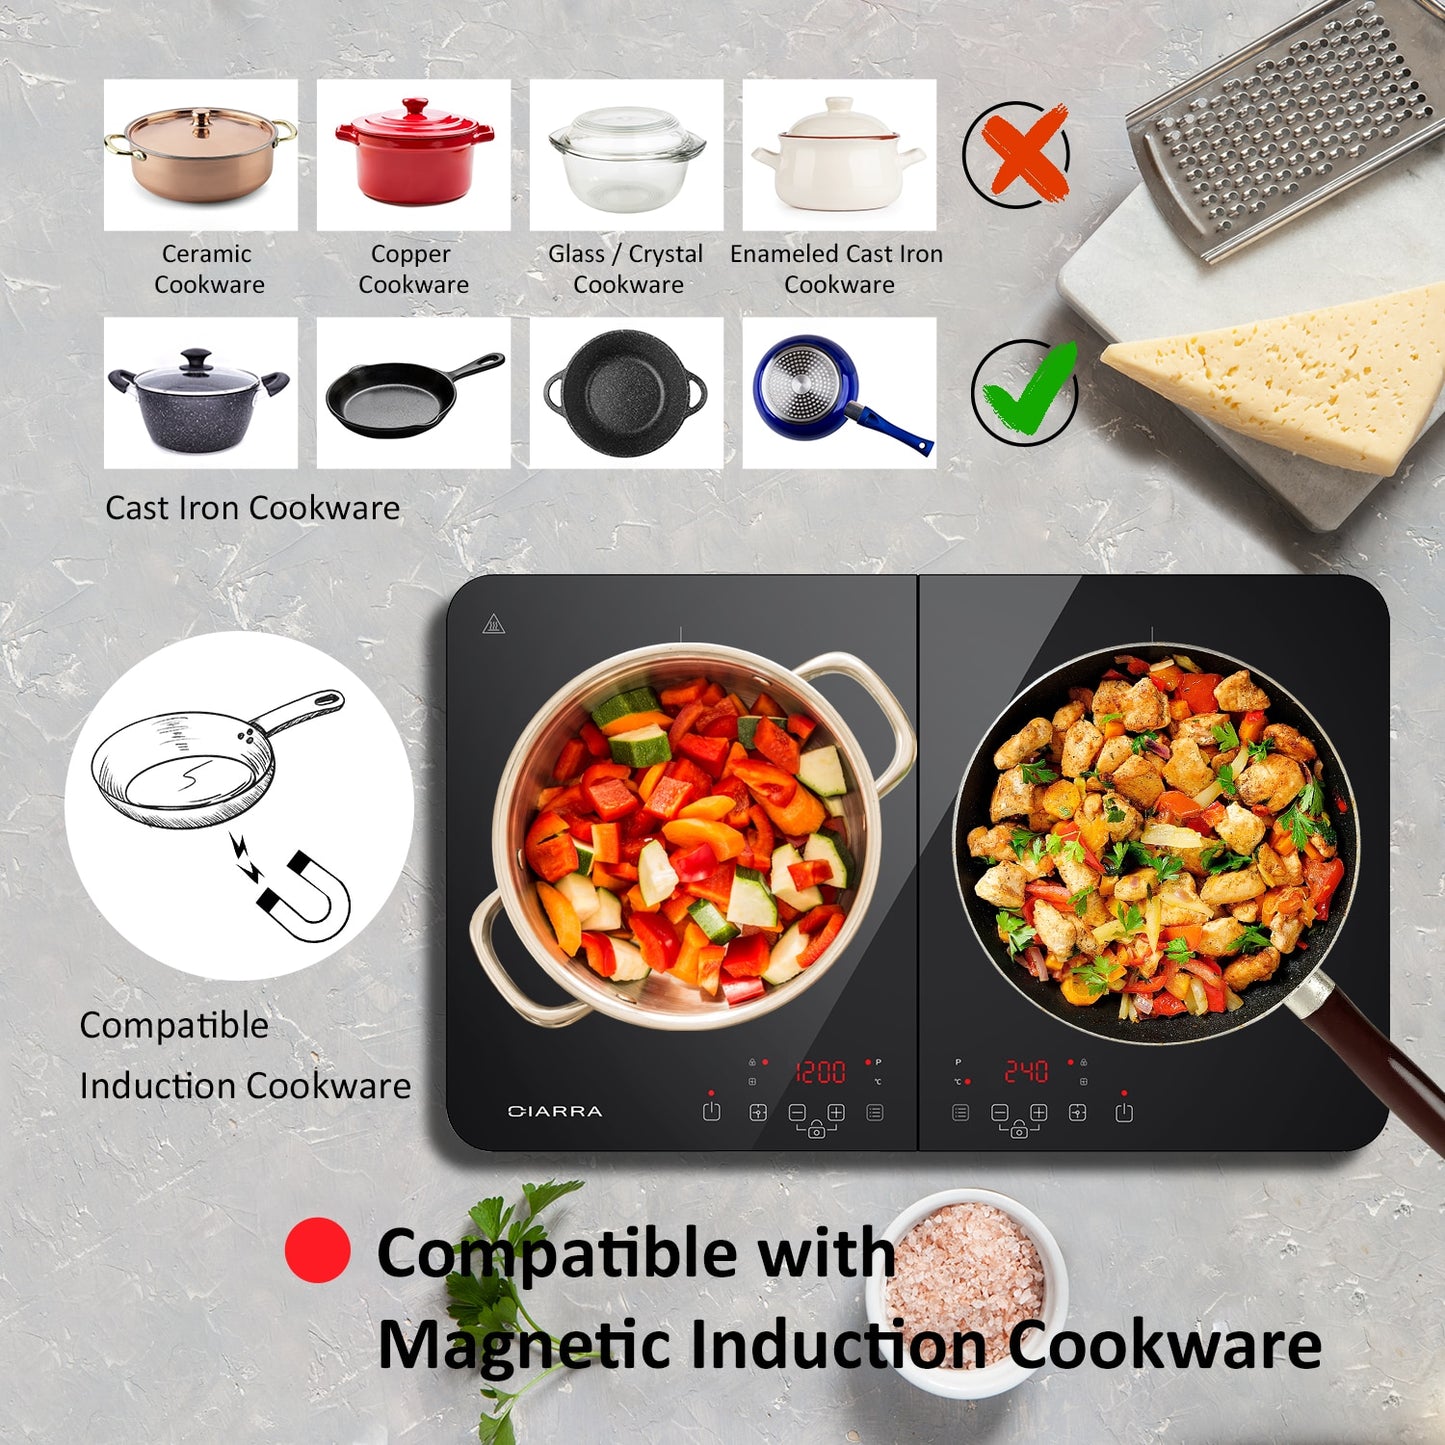 CIARRA CBTIH2 Induction Hob 3500W, Double Induction Cooker with Sensor Touch Control 10 Temperature Levels Multiple Power Level